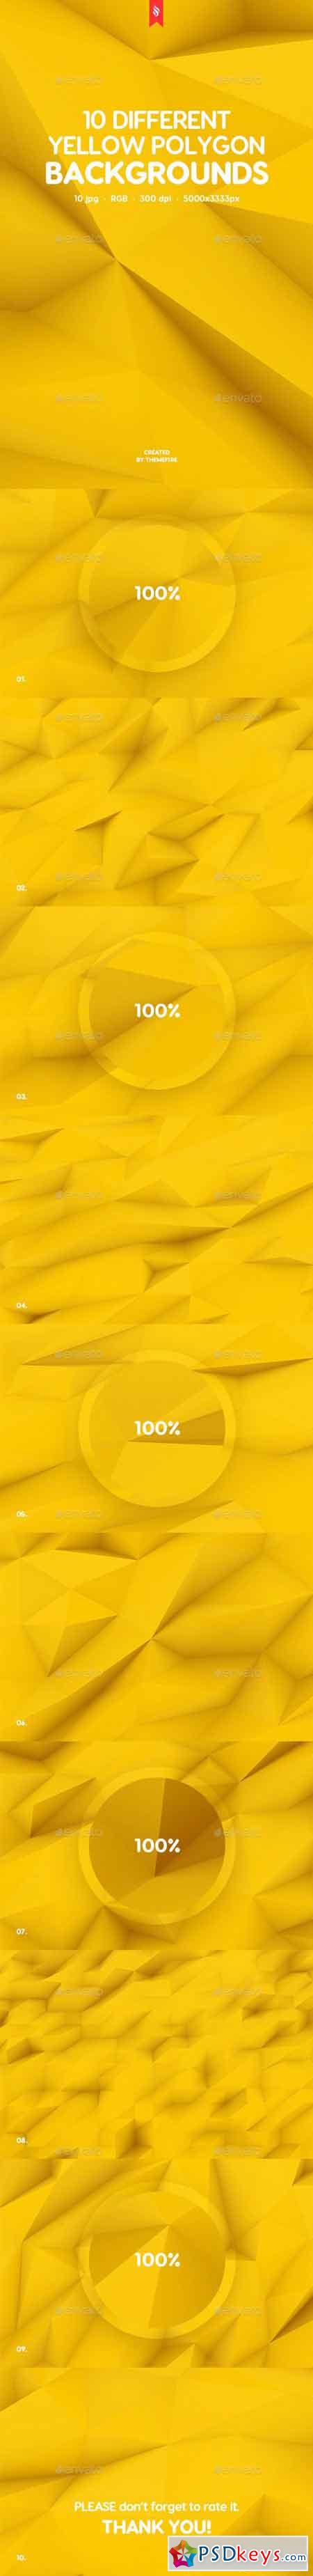 10 Different Yellow Polygon Backgrounds 20364620